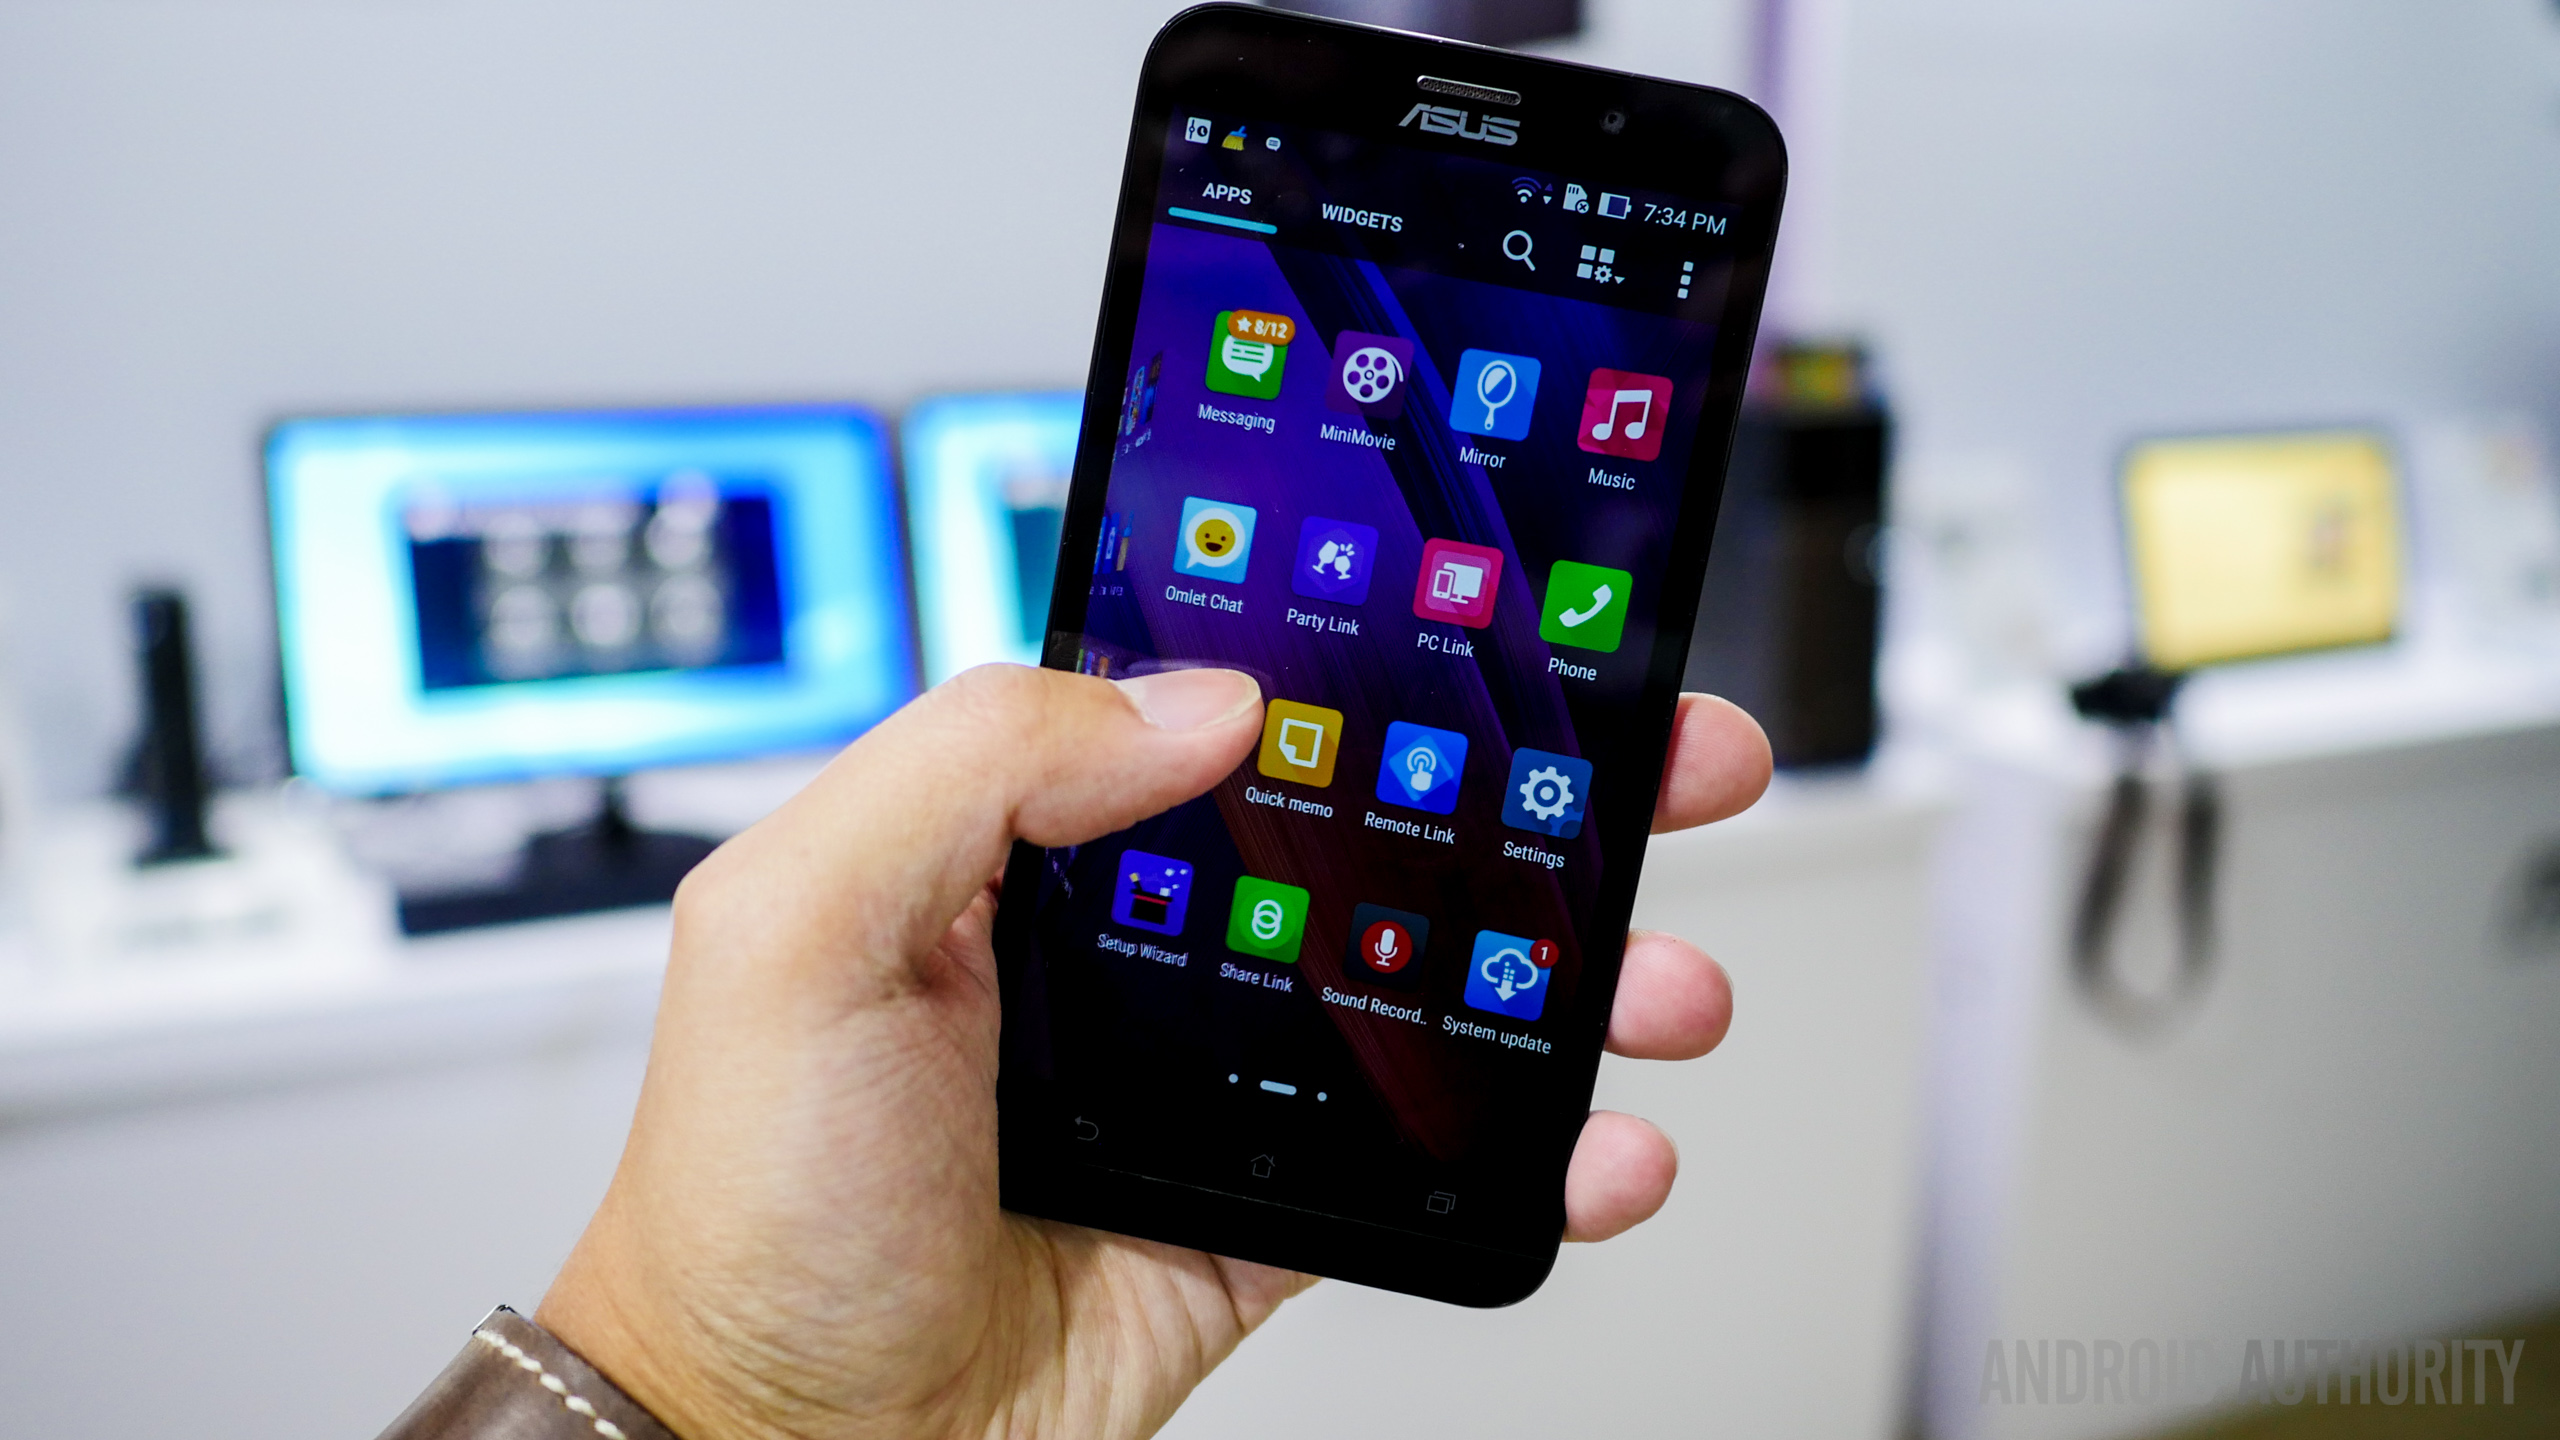 asus zenfone 2 first look a (11 of 19)